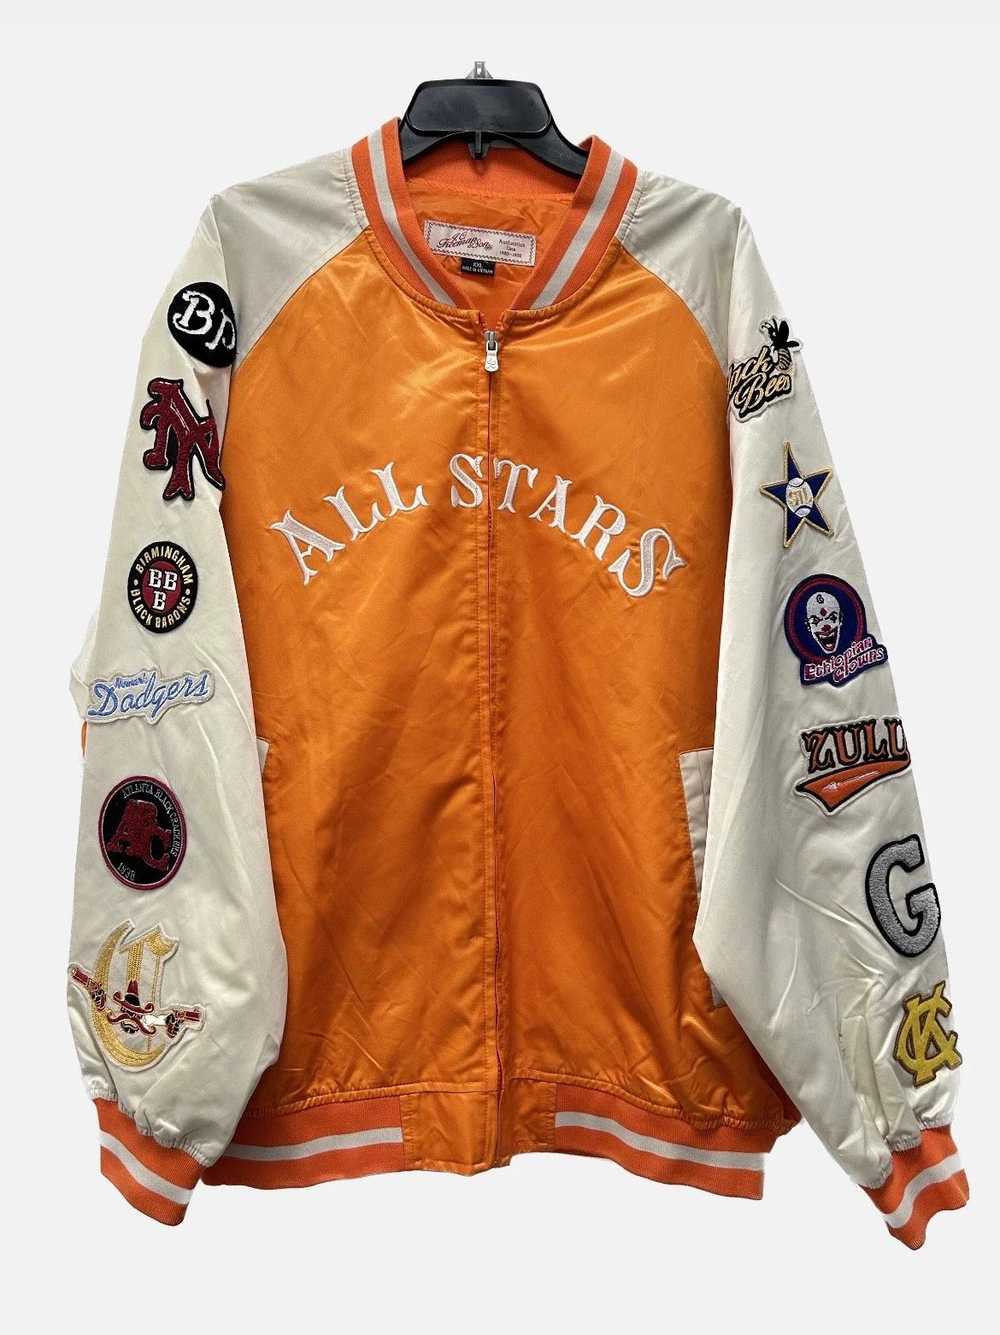 Other All Stars: Negro League Patch-Bomber Jacket - image 1